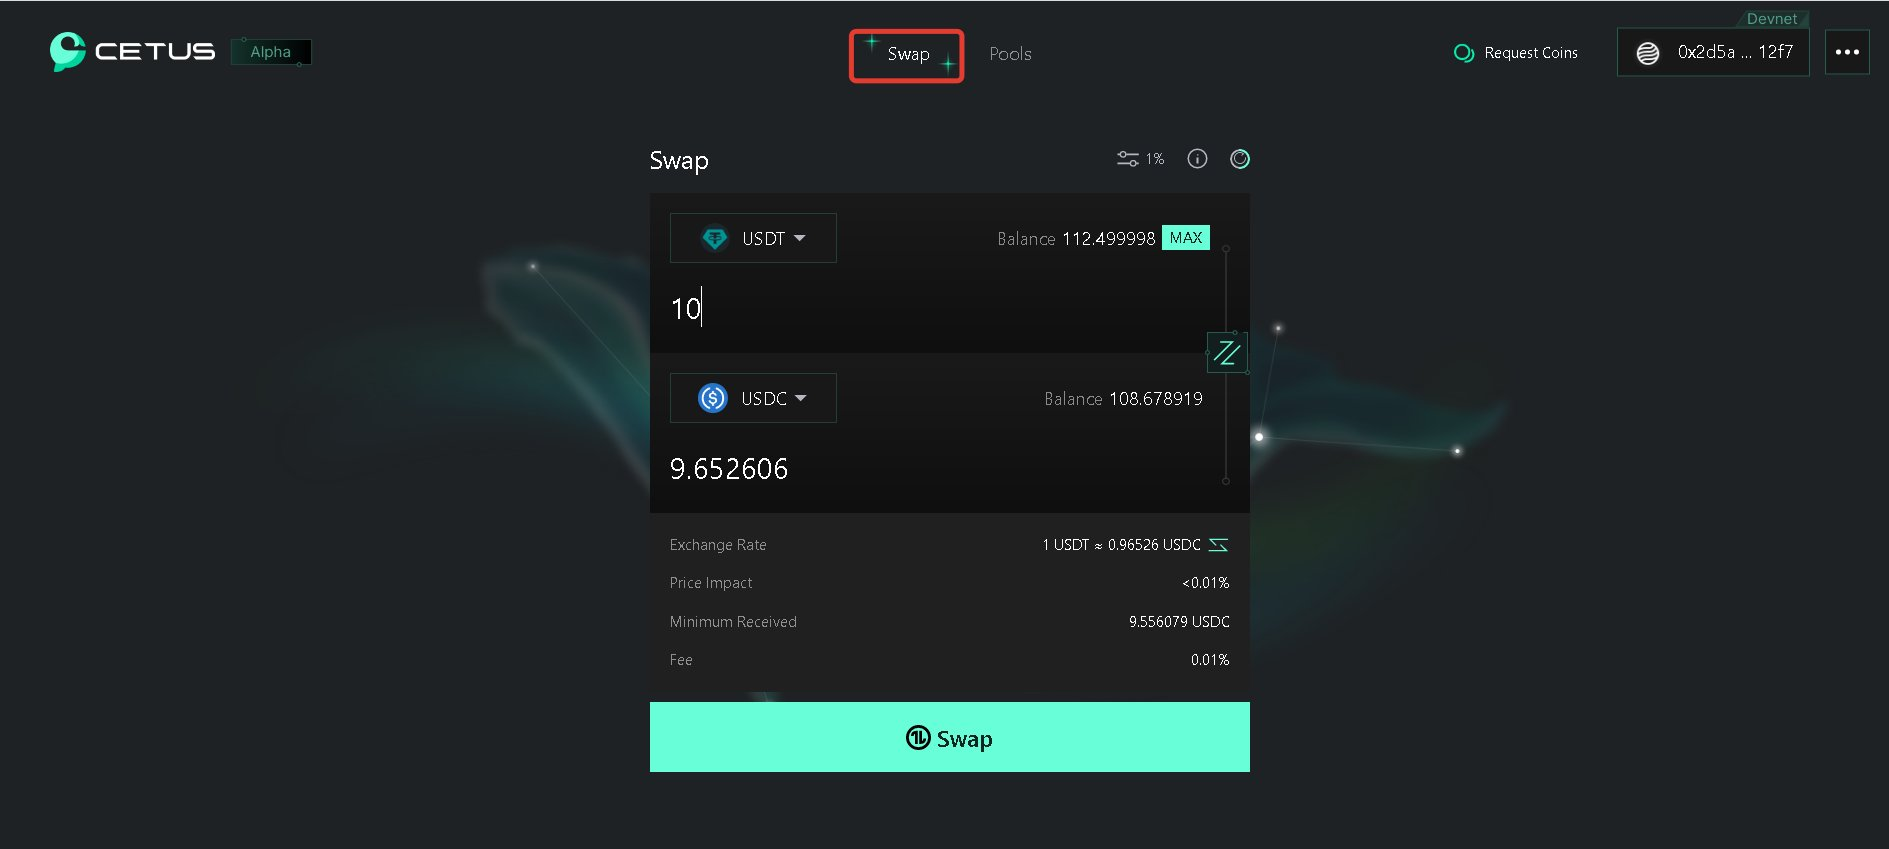 Next, in the "Swap" tab, indicate the tokens that you want to swap and their quantity. Press "Swap".